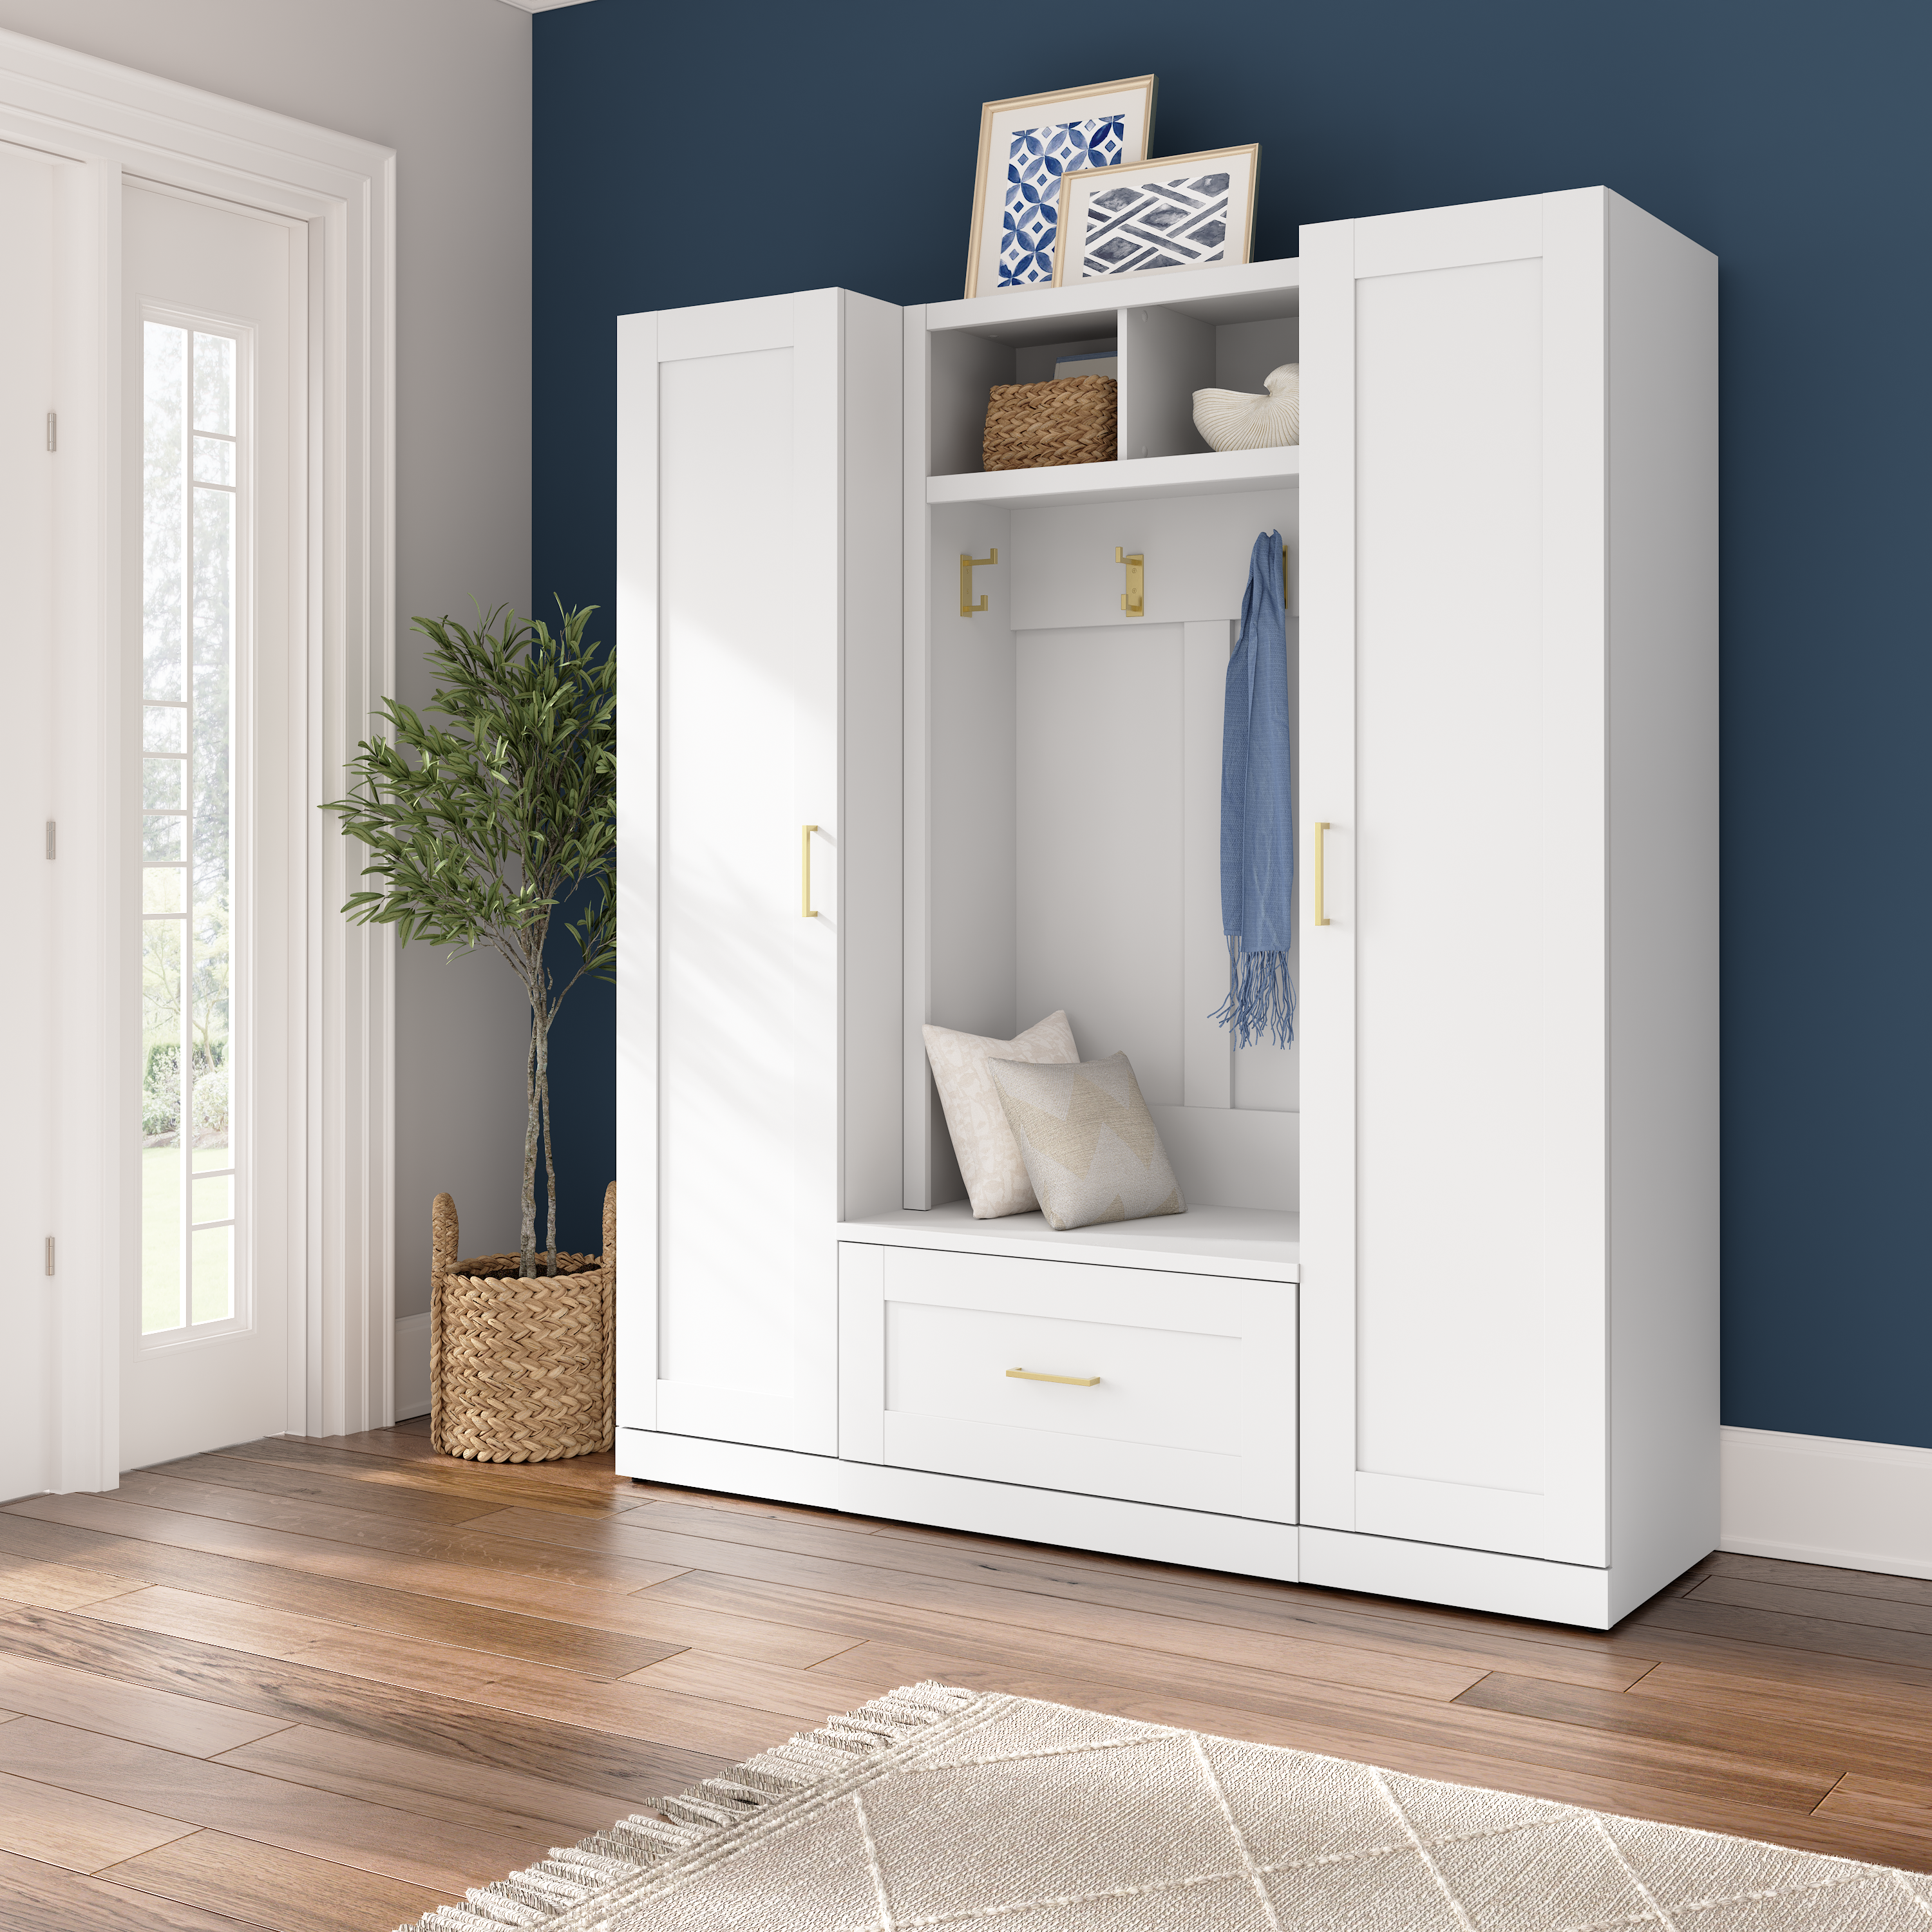 Shop Bush Furniture Hampton Heights Full Entryway Storage Set with Hall Tree, Shoe Bench with Drawer and Cabinet 01 HHS013WH #color_white